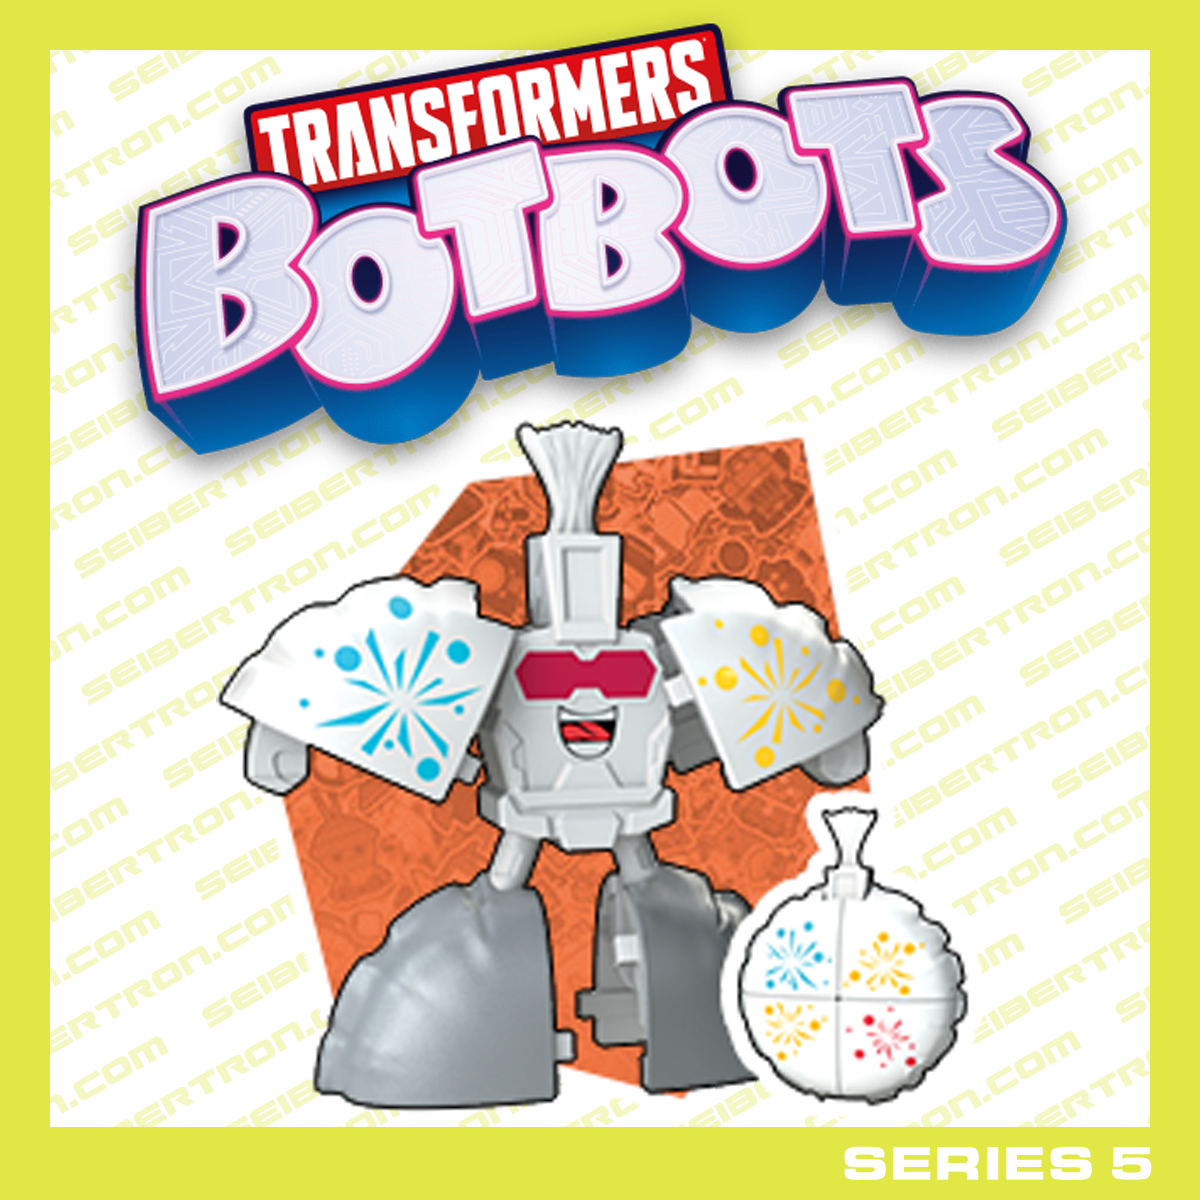 BUFFLOON Transformers BotBots Series 5 Party Favors foil party balloon 2020